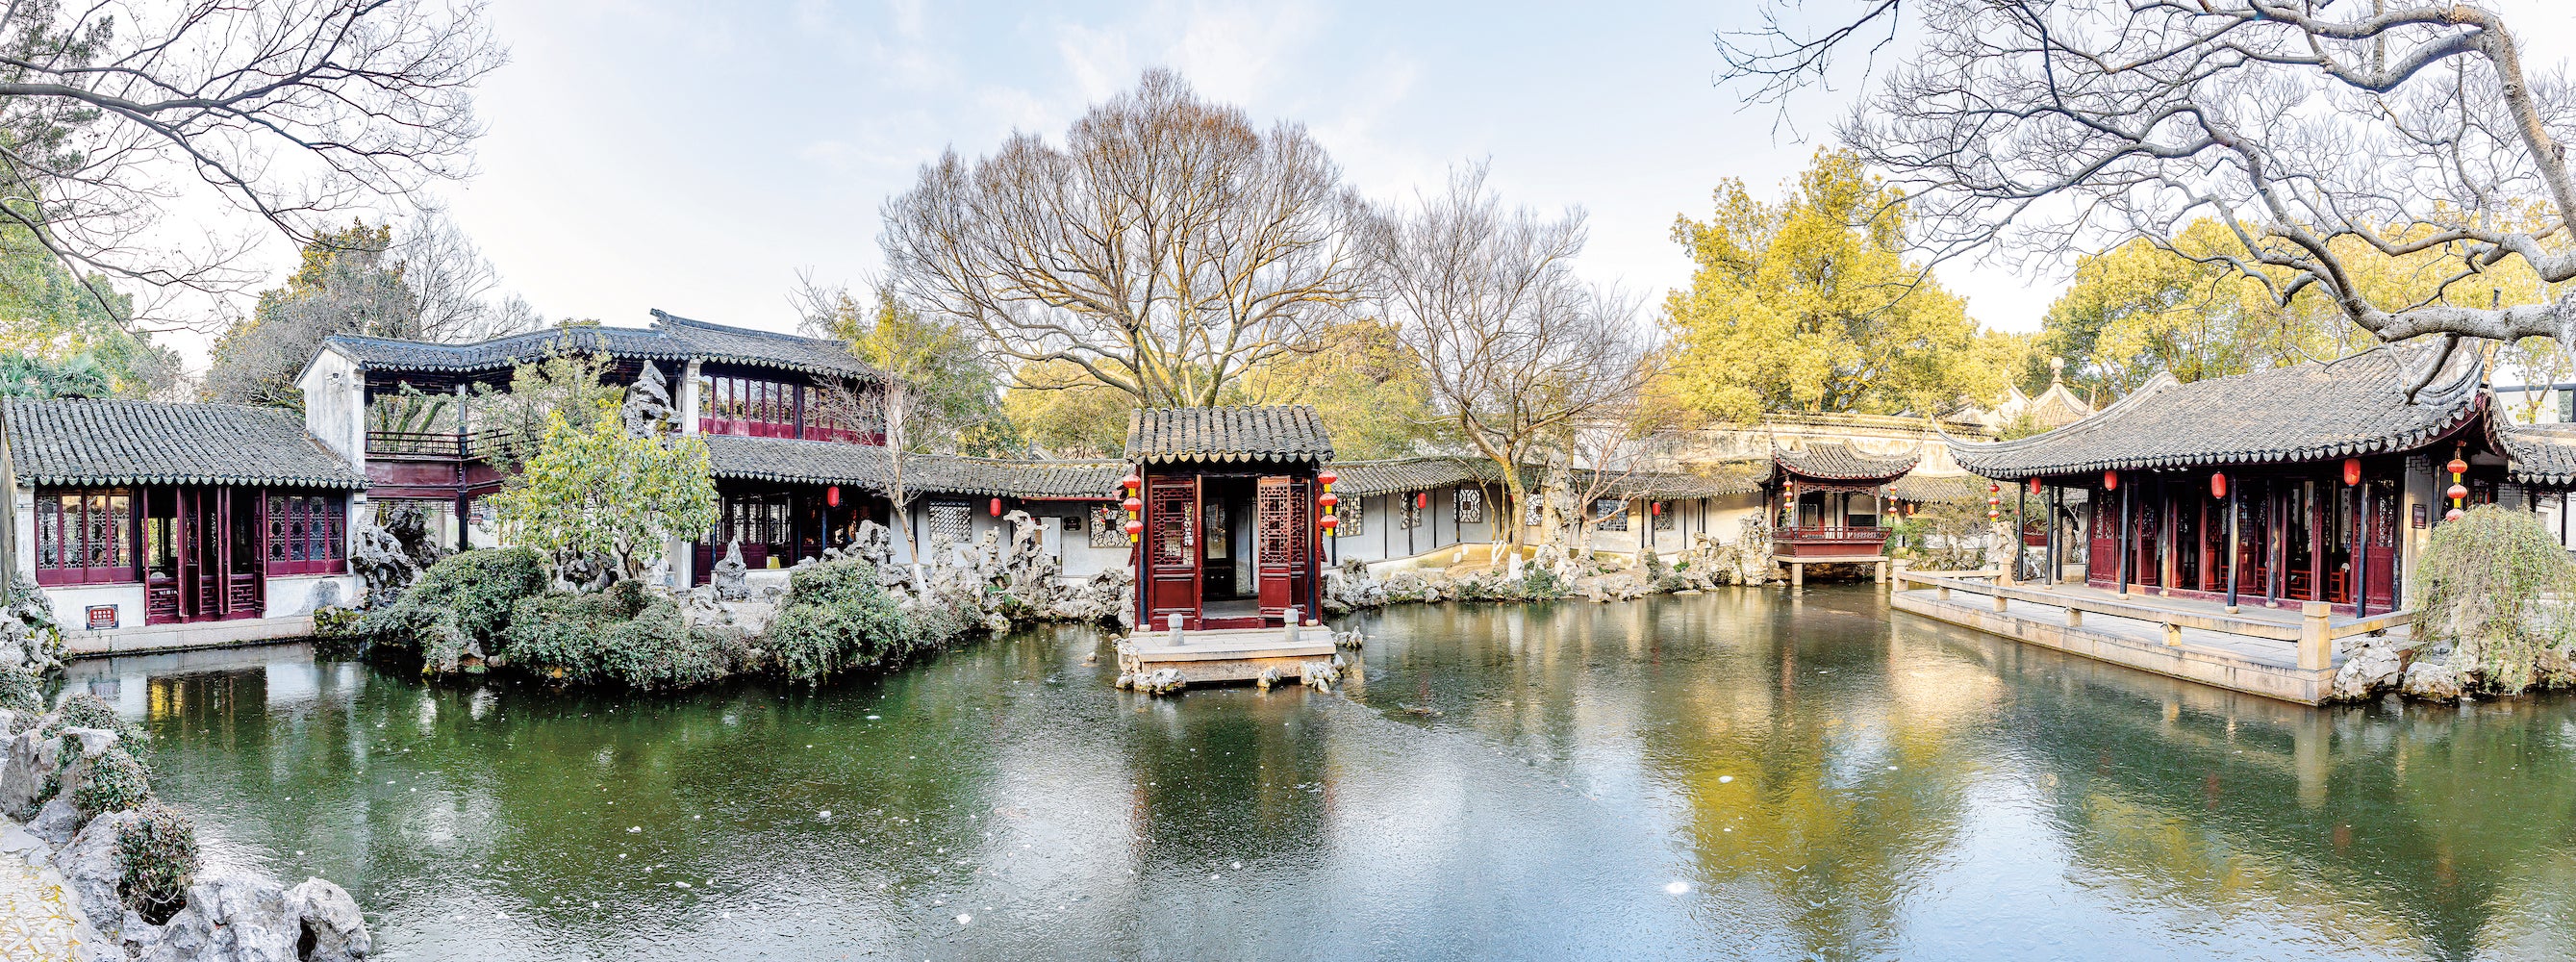 Wandering around the classical gardens in Suzhou, visitors may feel as if they have stepped into a traditional painting